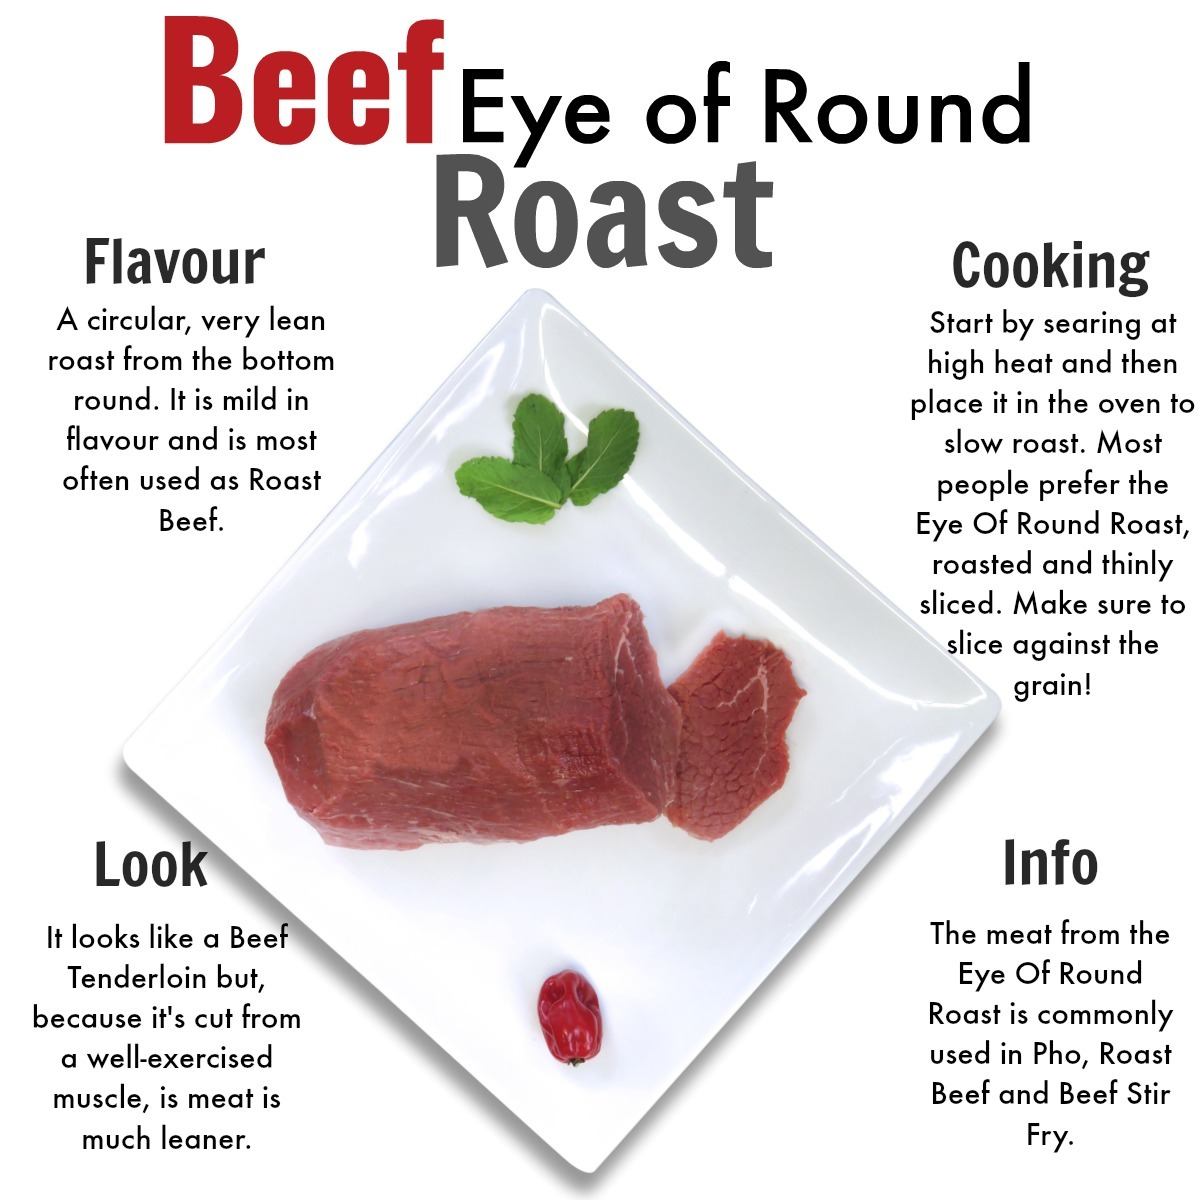 Affordable grass-fed beef delivery near me, steaks, ground beef and more - Nutrafams - Beef Eye of Round Roast 2